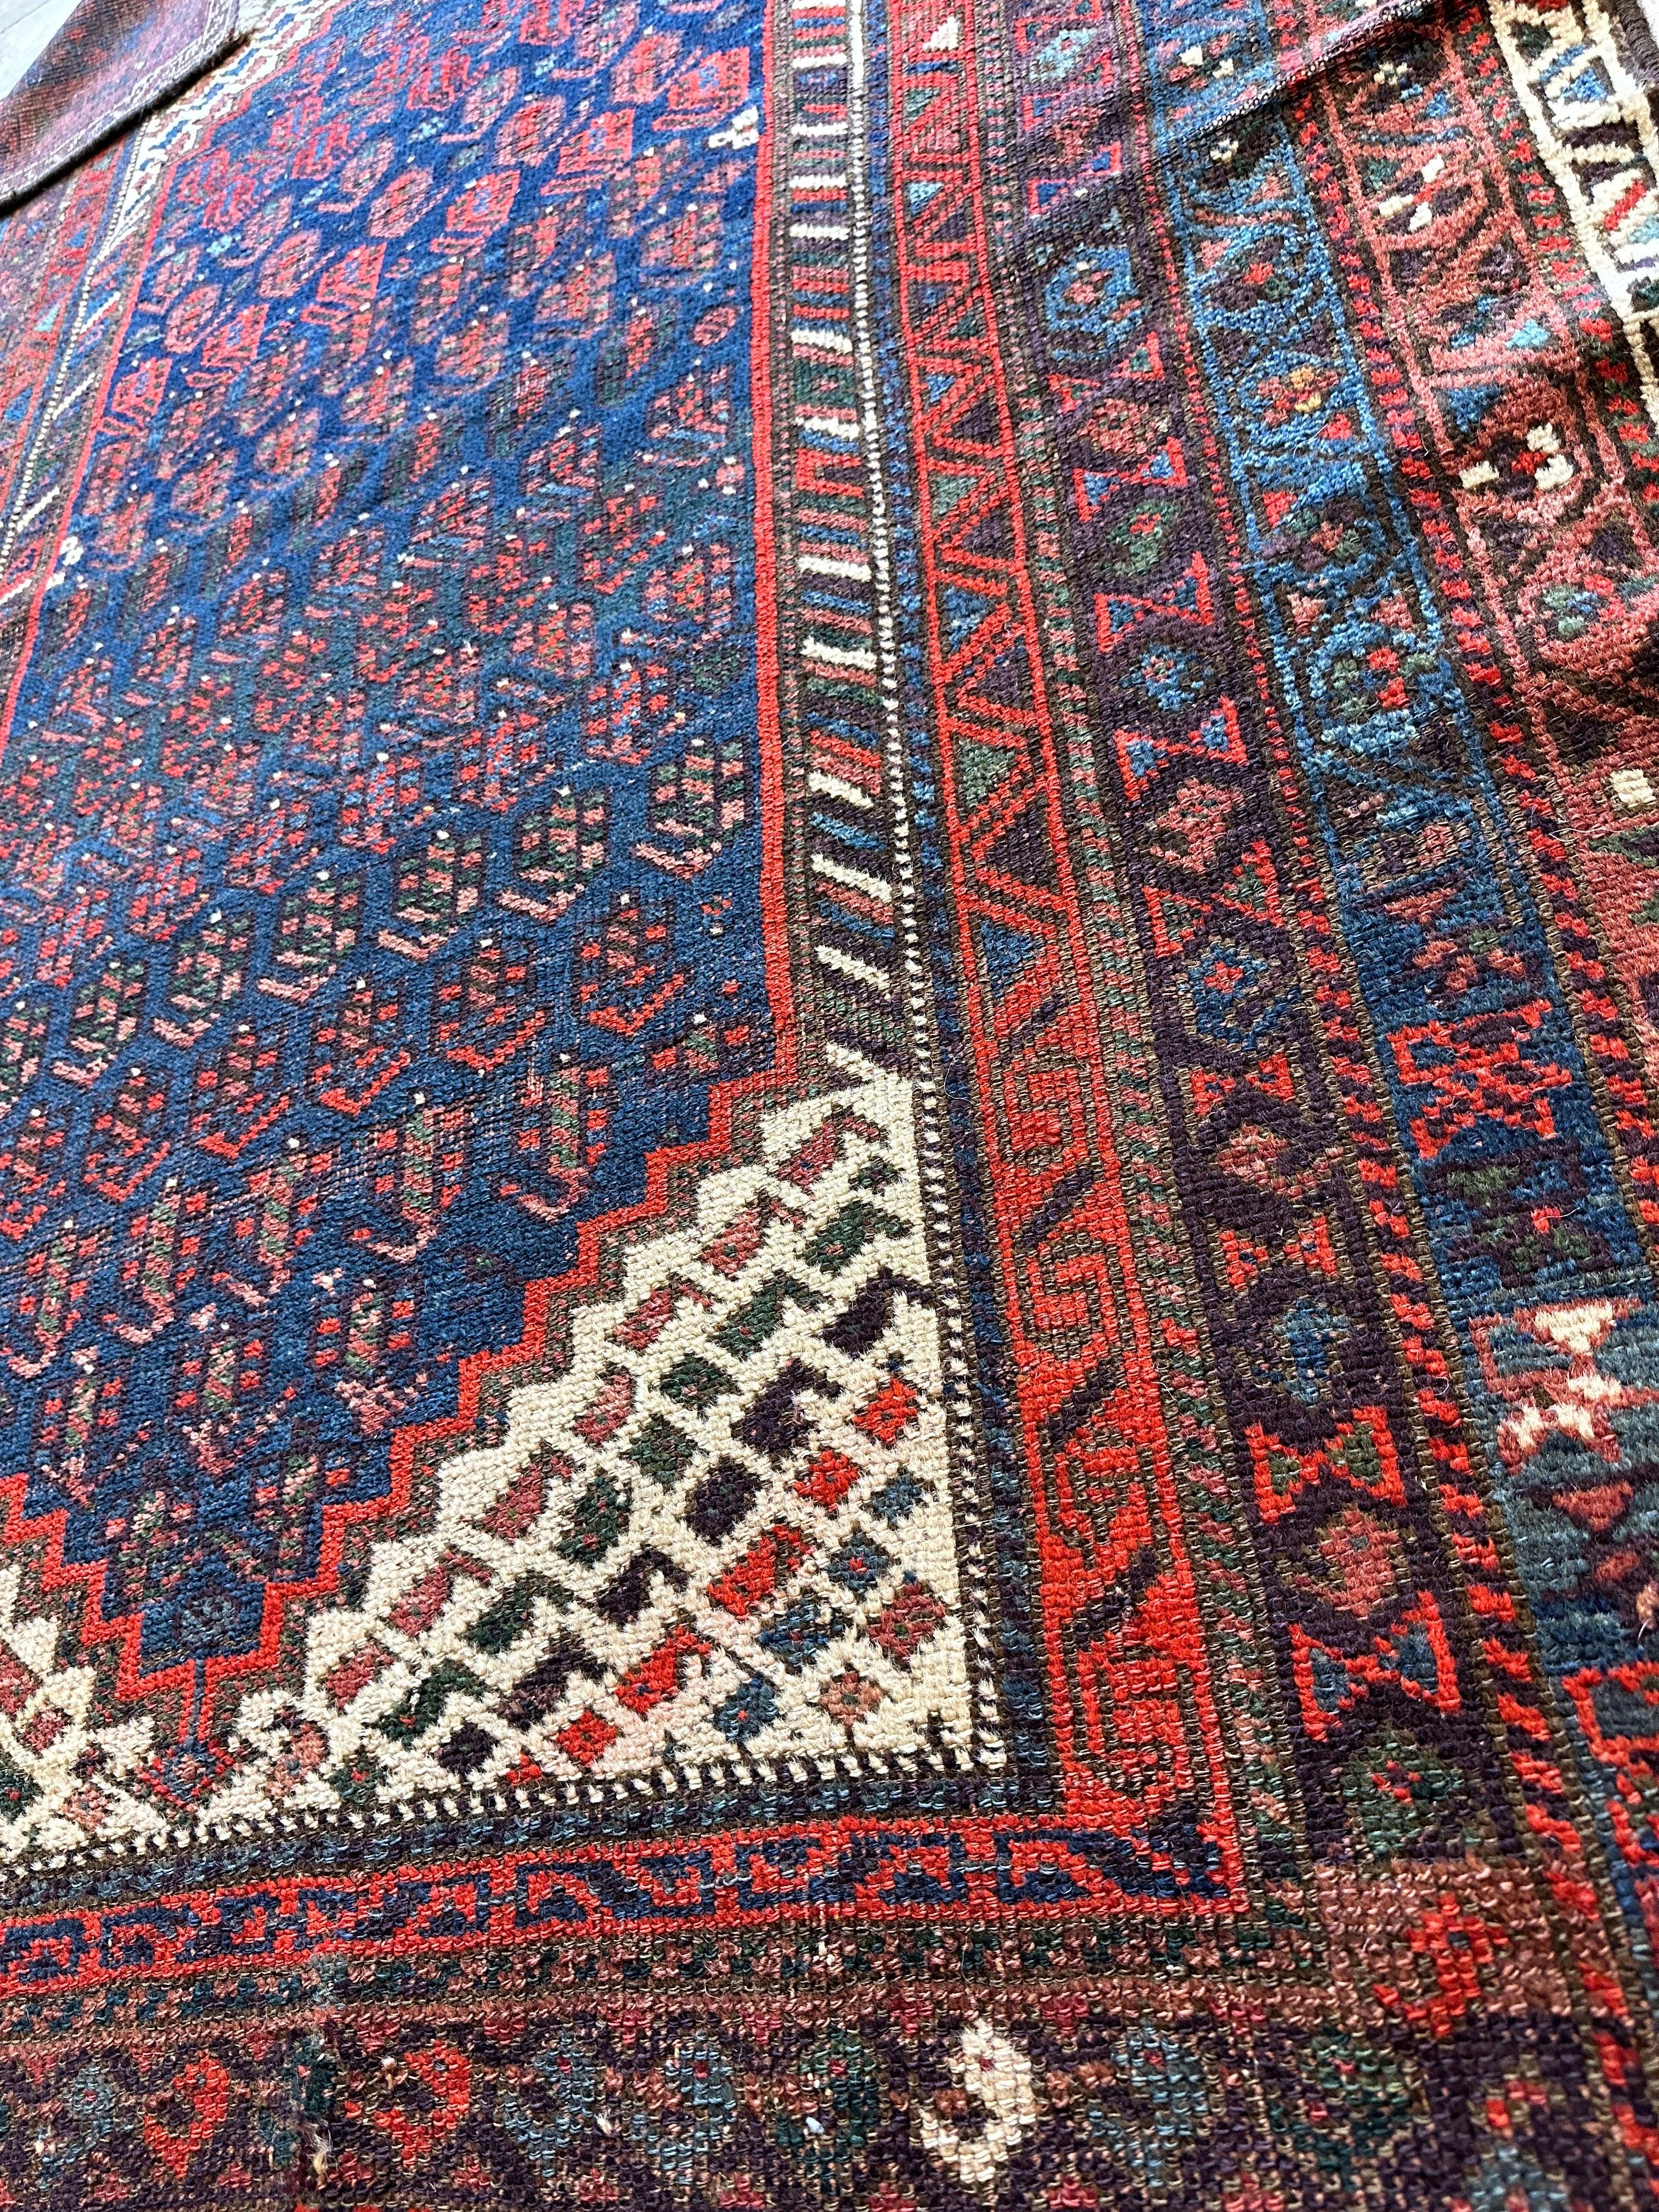 Antique Persian Paisely Rug 4’6” x 7’